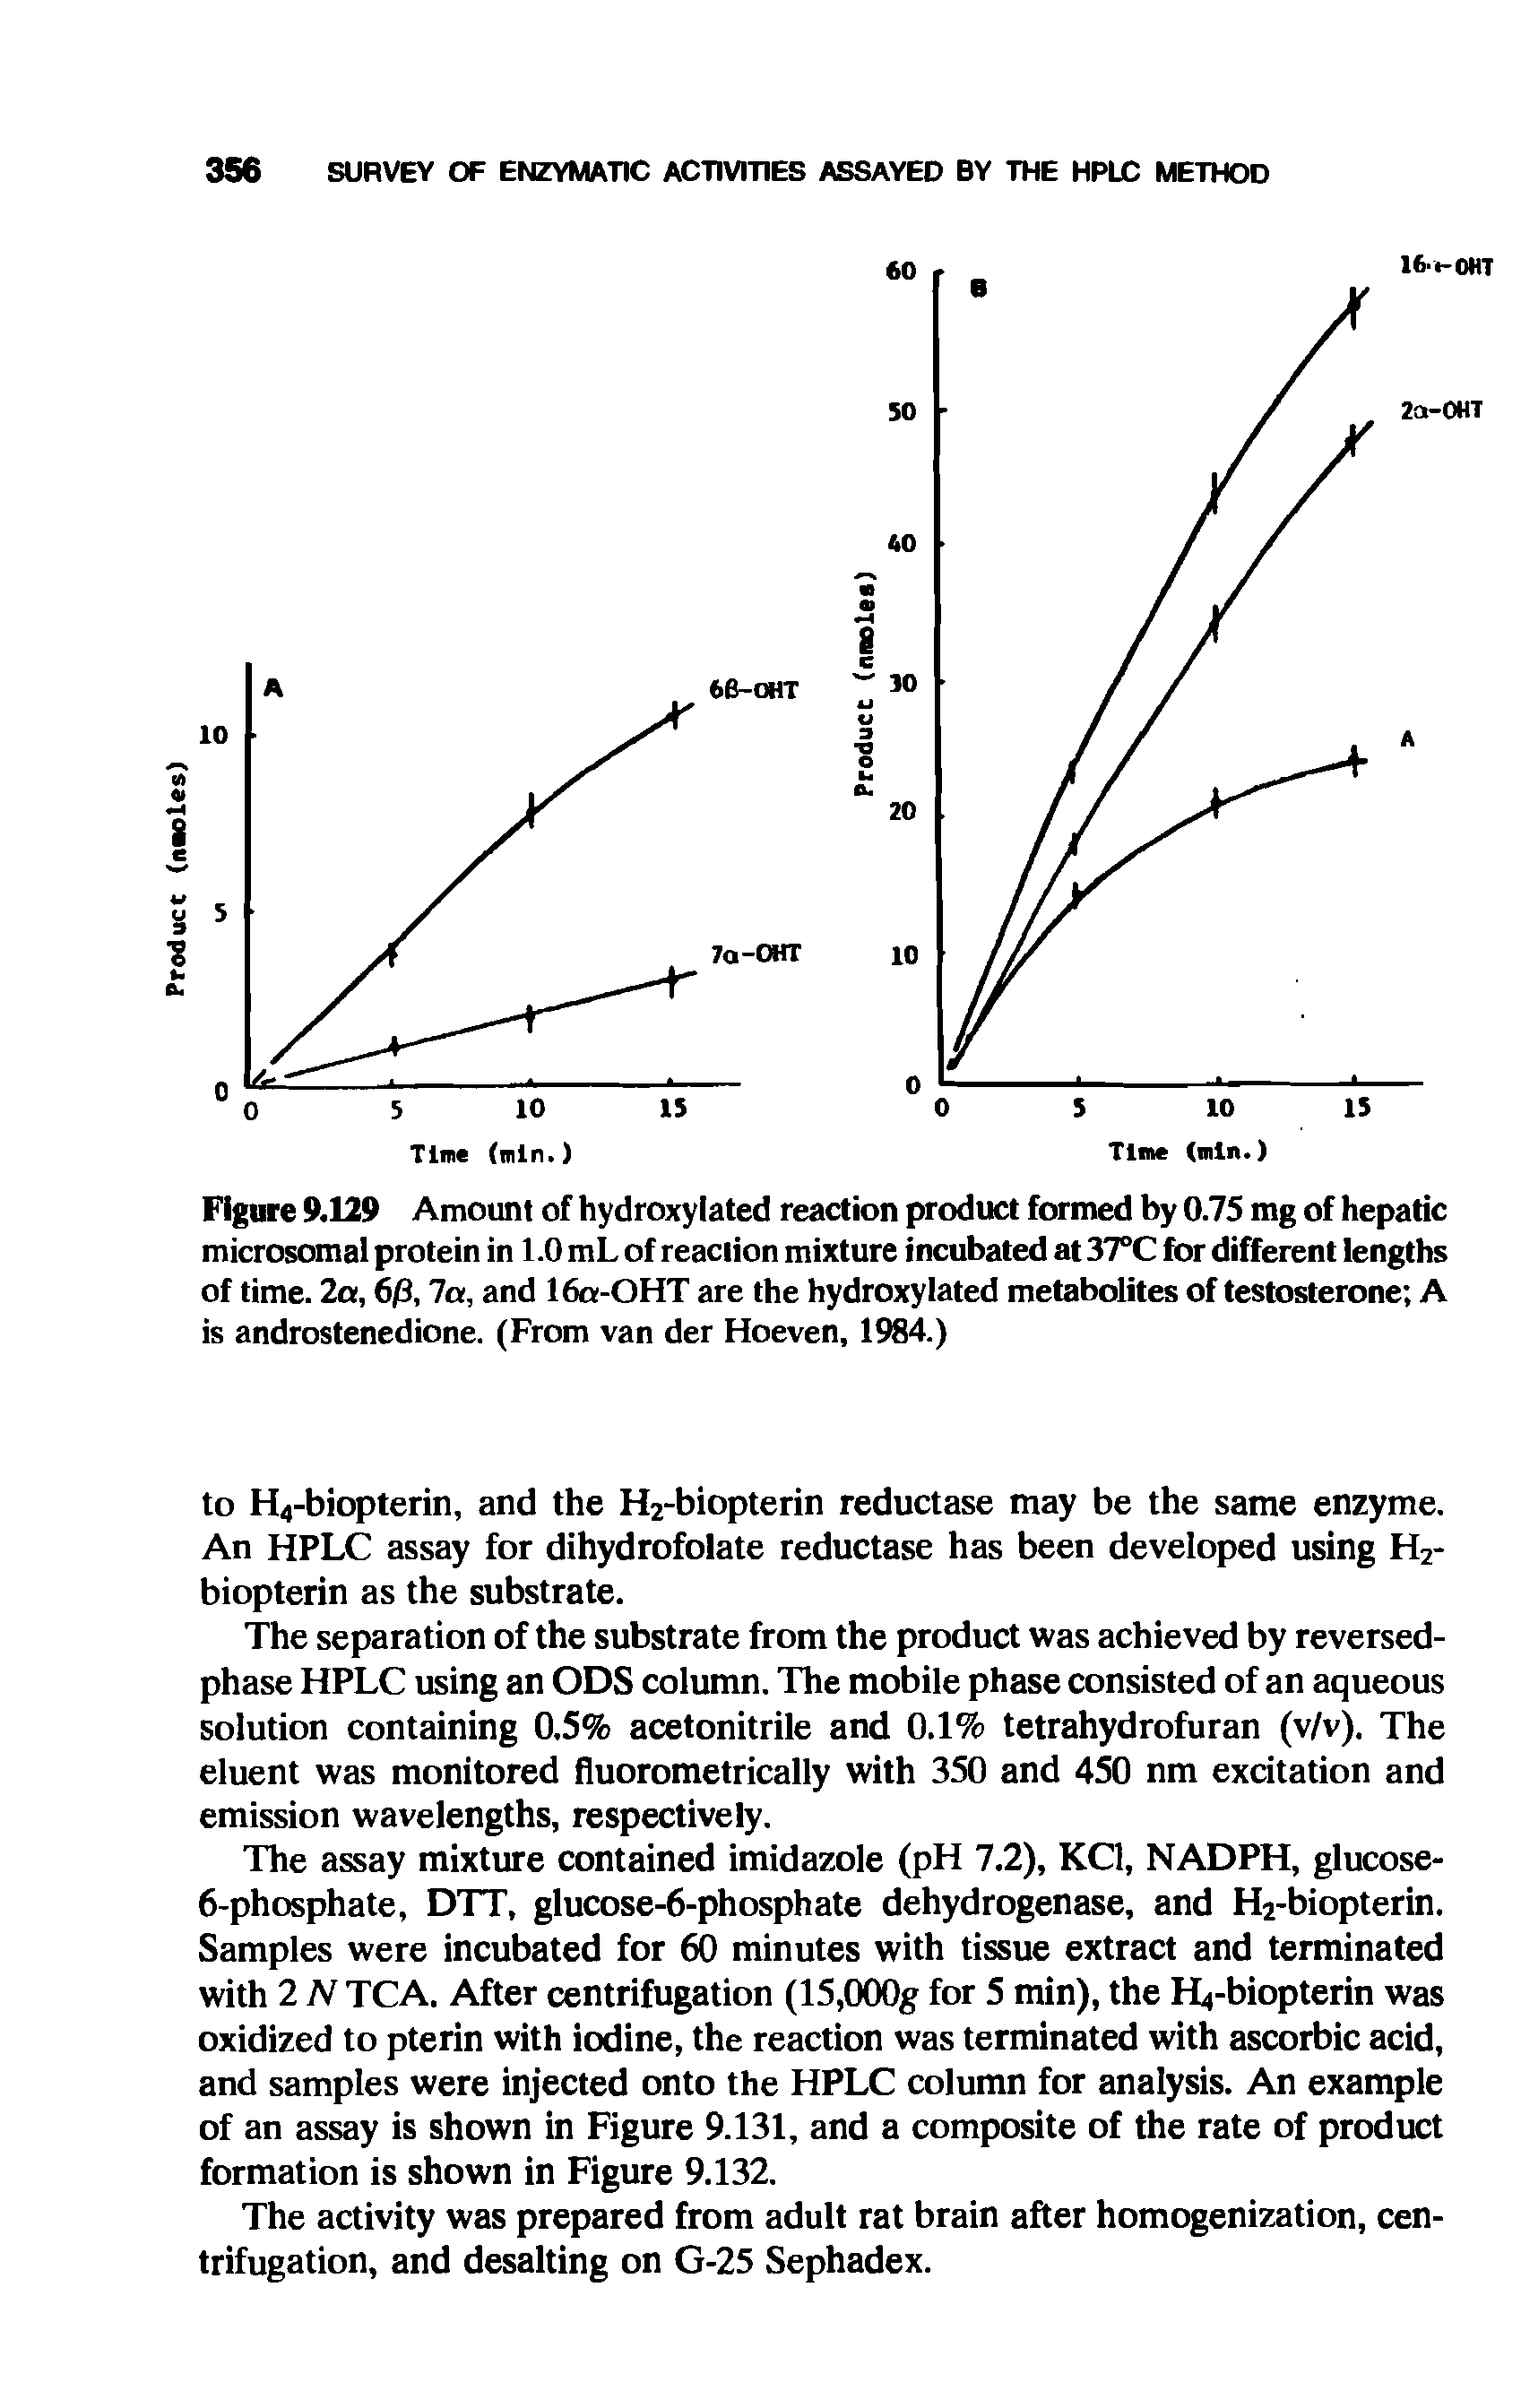 Figure 9.129 Amount of hydroxylated reaction product formed by 0.75 mg of hepatic microsomal protein in 1.0 mL of reaction mixture incubated at 37°C for different lengths of time. 2a, 6jQ, 7a, and 16a-OHT are the hydroxylated metabolites of testosterone A is androstenedione. (From van der Hoeven, 1984.)...